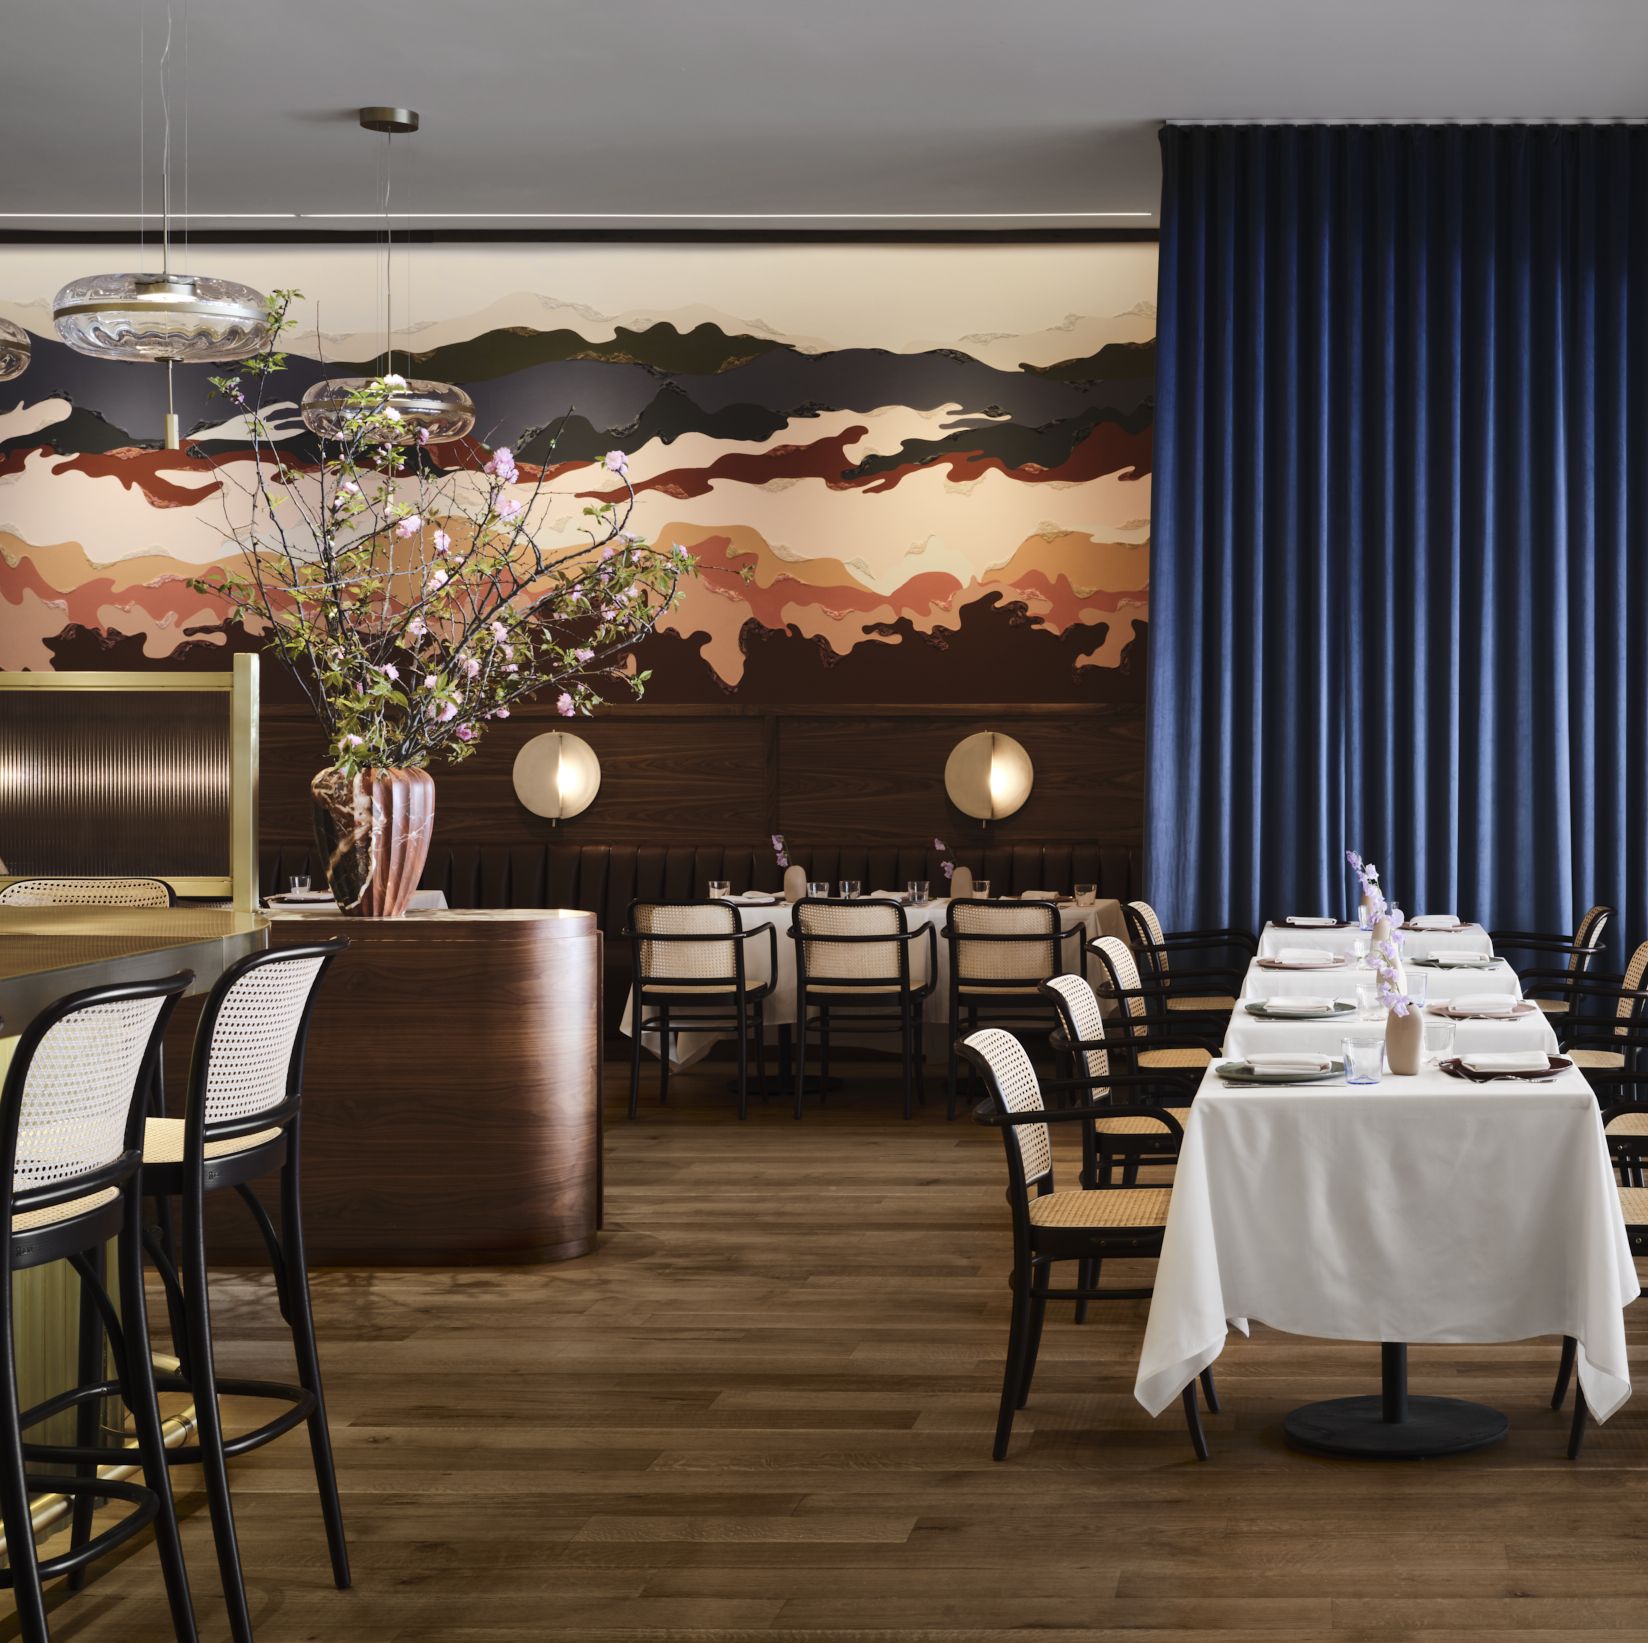 This Glamorous Restaurant Melds la Dolce Vita with Southern Hospitality